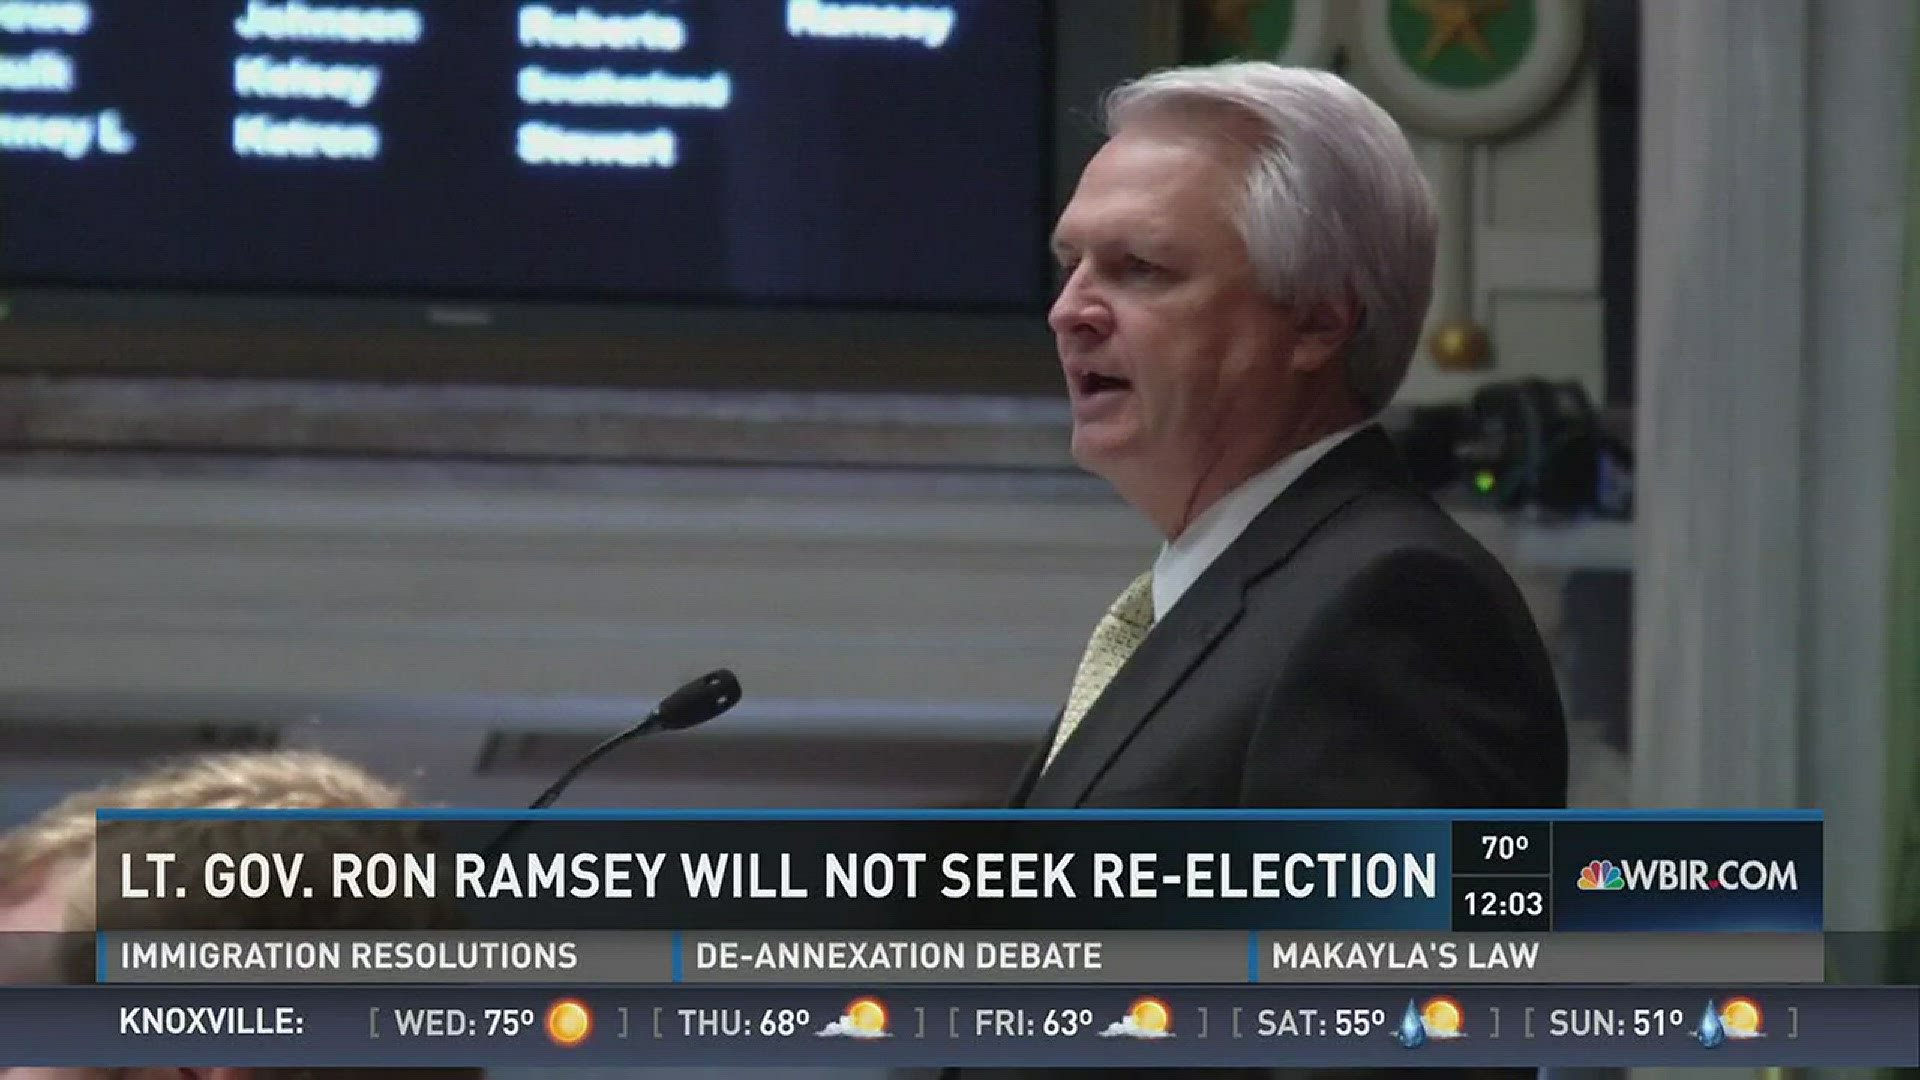 Lt. Gov. Ron Ramsey will not seek re-election.